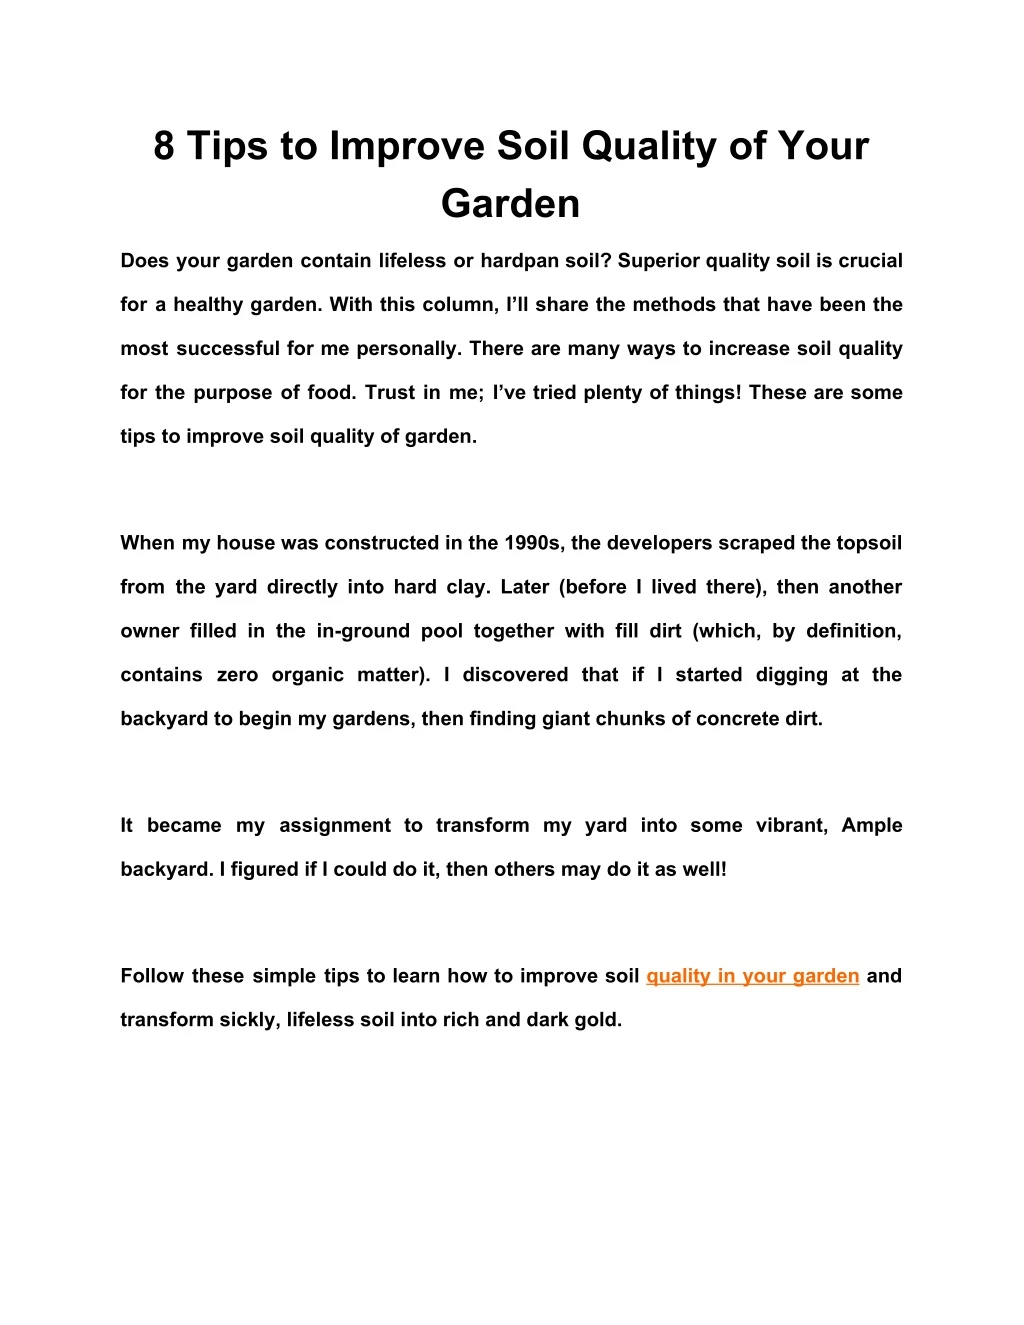 8 tips to improve soil quality of your garden